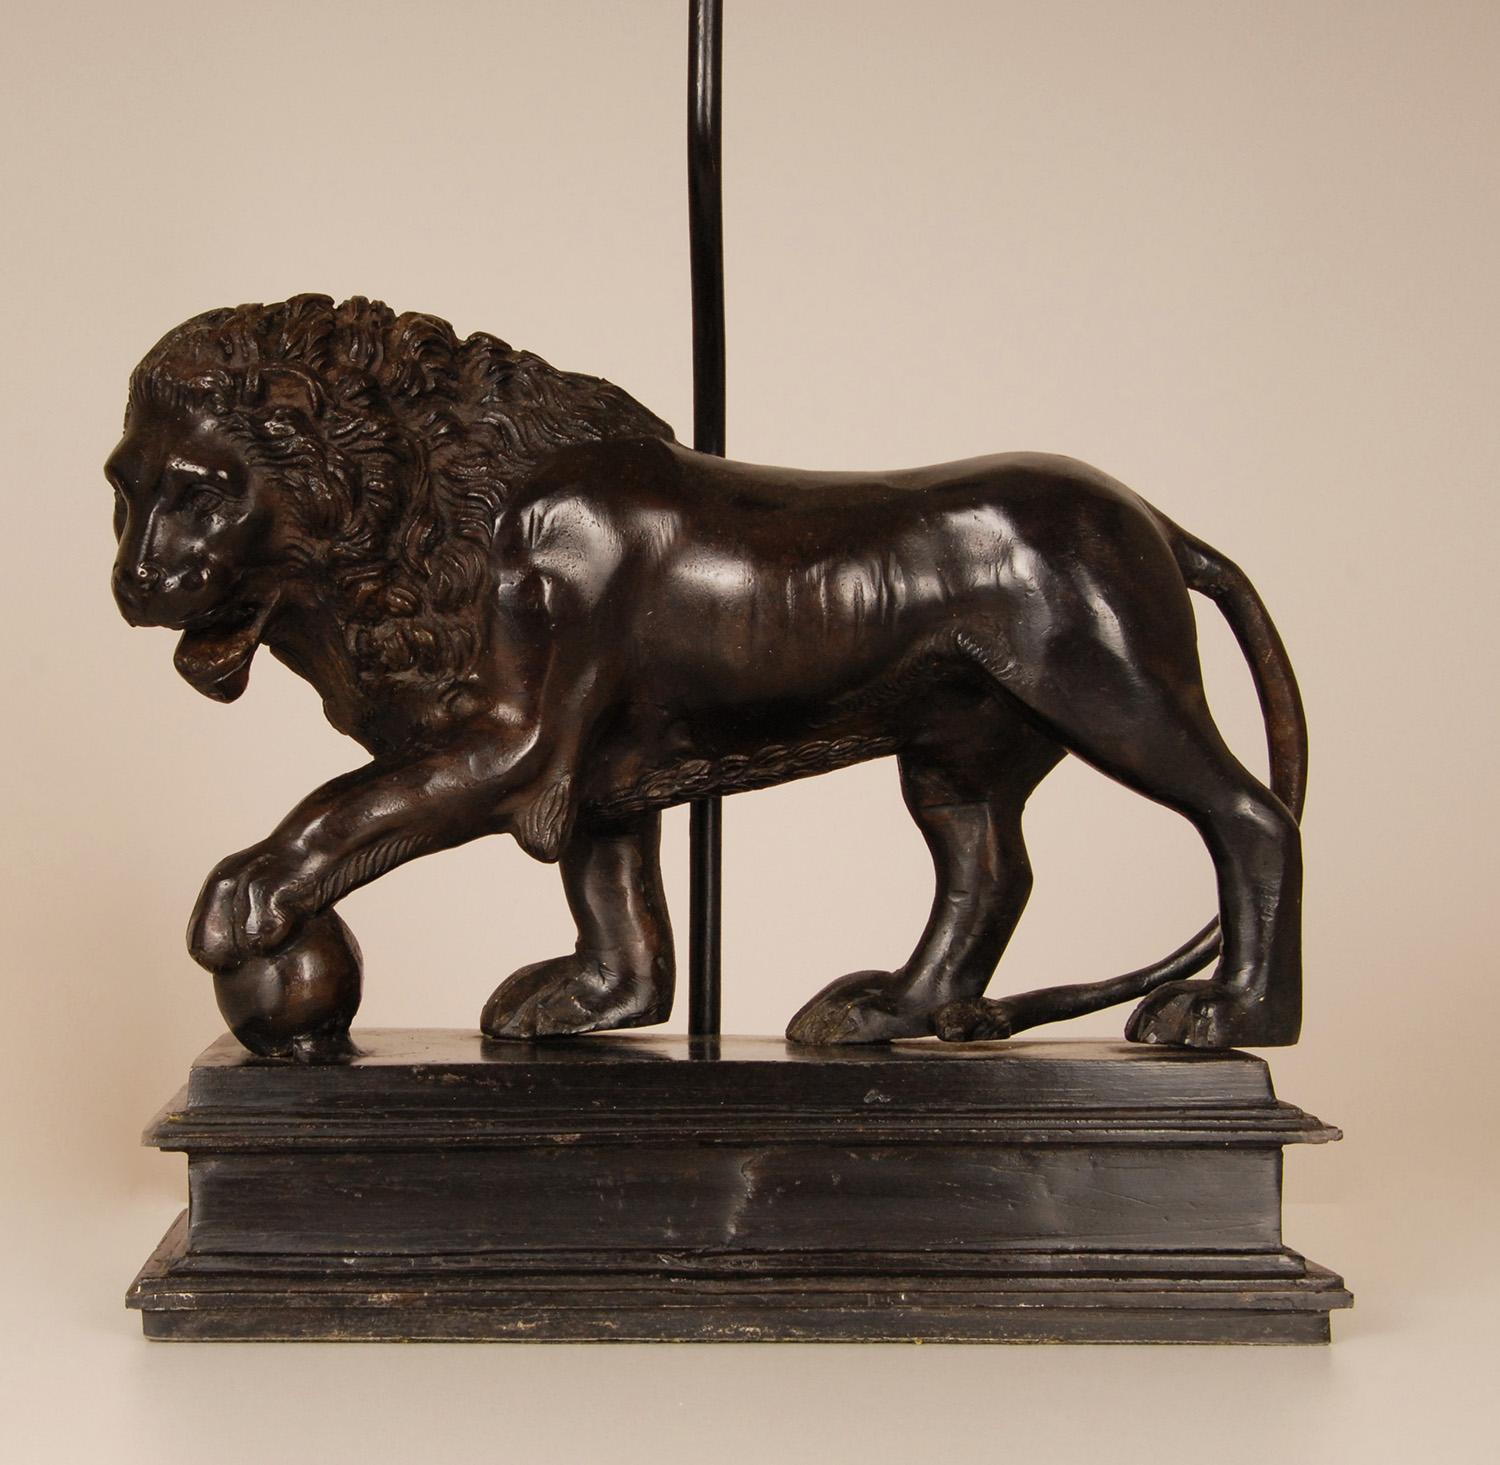 Italian Medici Lions table lamps, heavy lamps made of black patinated metal
Traditional Italian Classic Roman style table lamps
Style: Traditionale, Classic, Roman, Neoclassical, Antique, Vintage
Design: In the manner of E.F. Caldwell, Chapman,